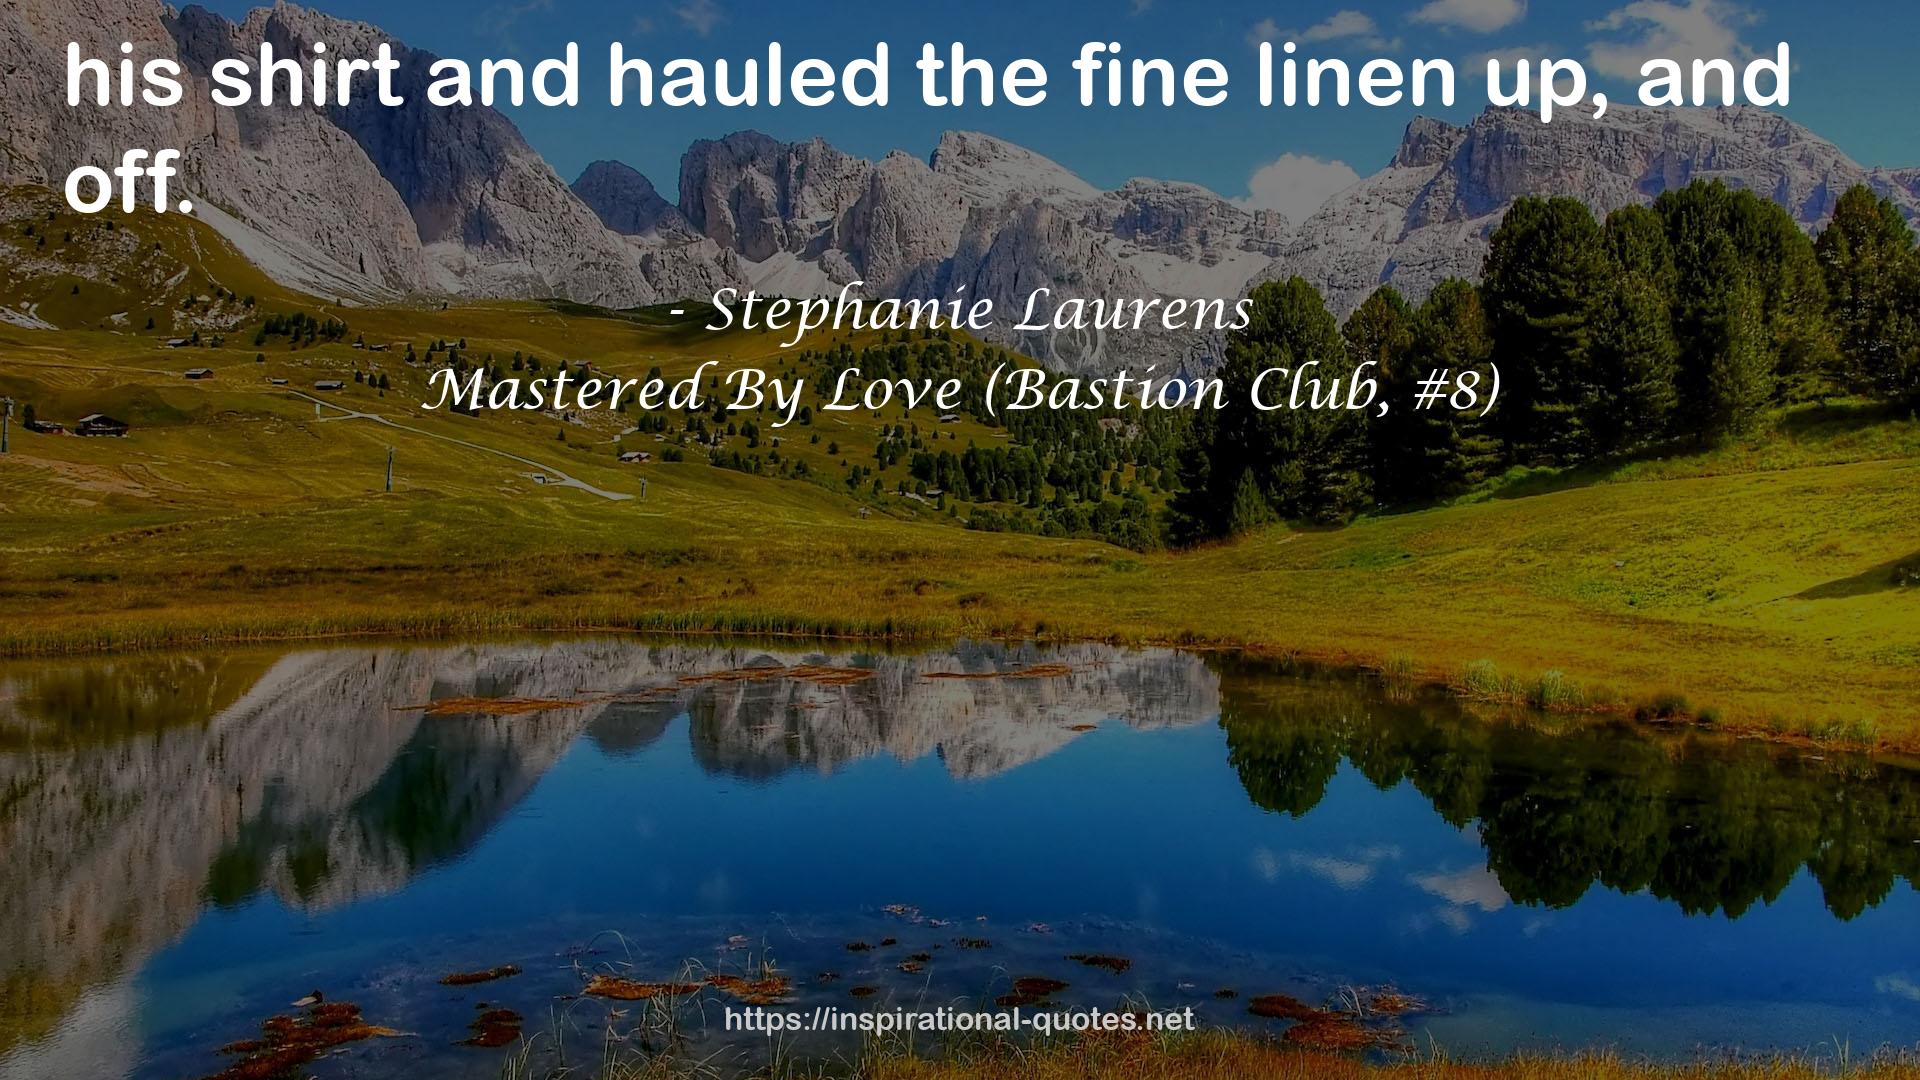 Mastered By Love (Bastion Club, #8) QUOTES